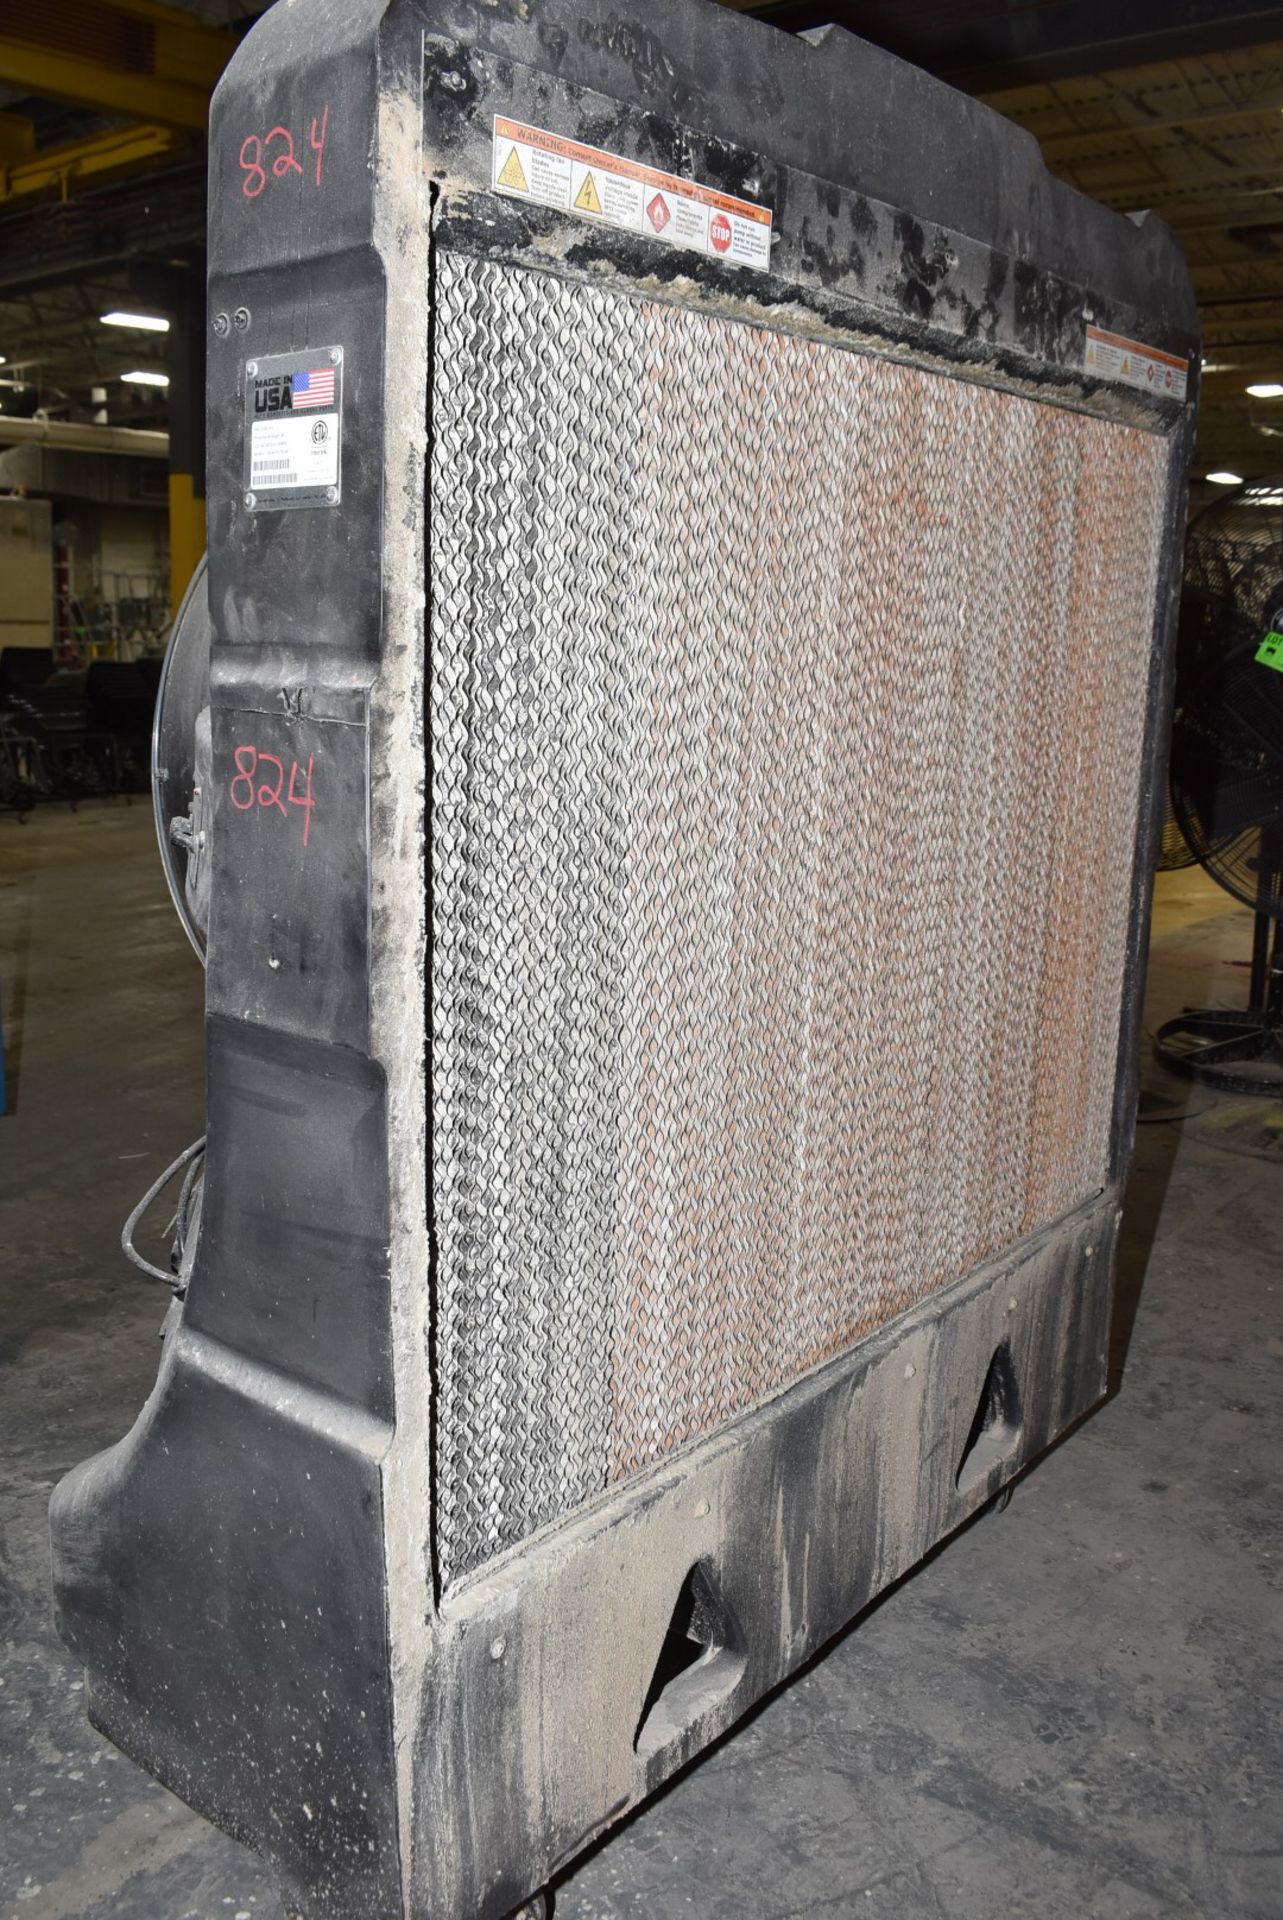 PORTACOOL JETSTREAM 260 PORTABLE EVAPORATIVE COOLER WITH 12,500 CFM, 25 MPH VELOCITY, VARIABLE - Image 2 of 4